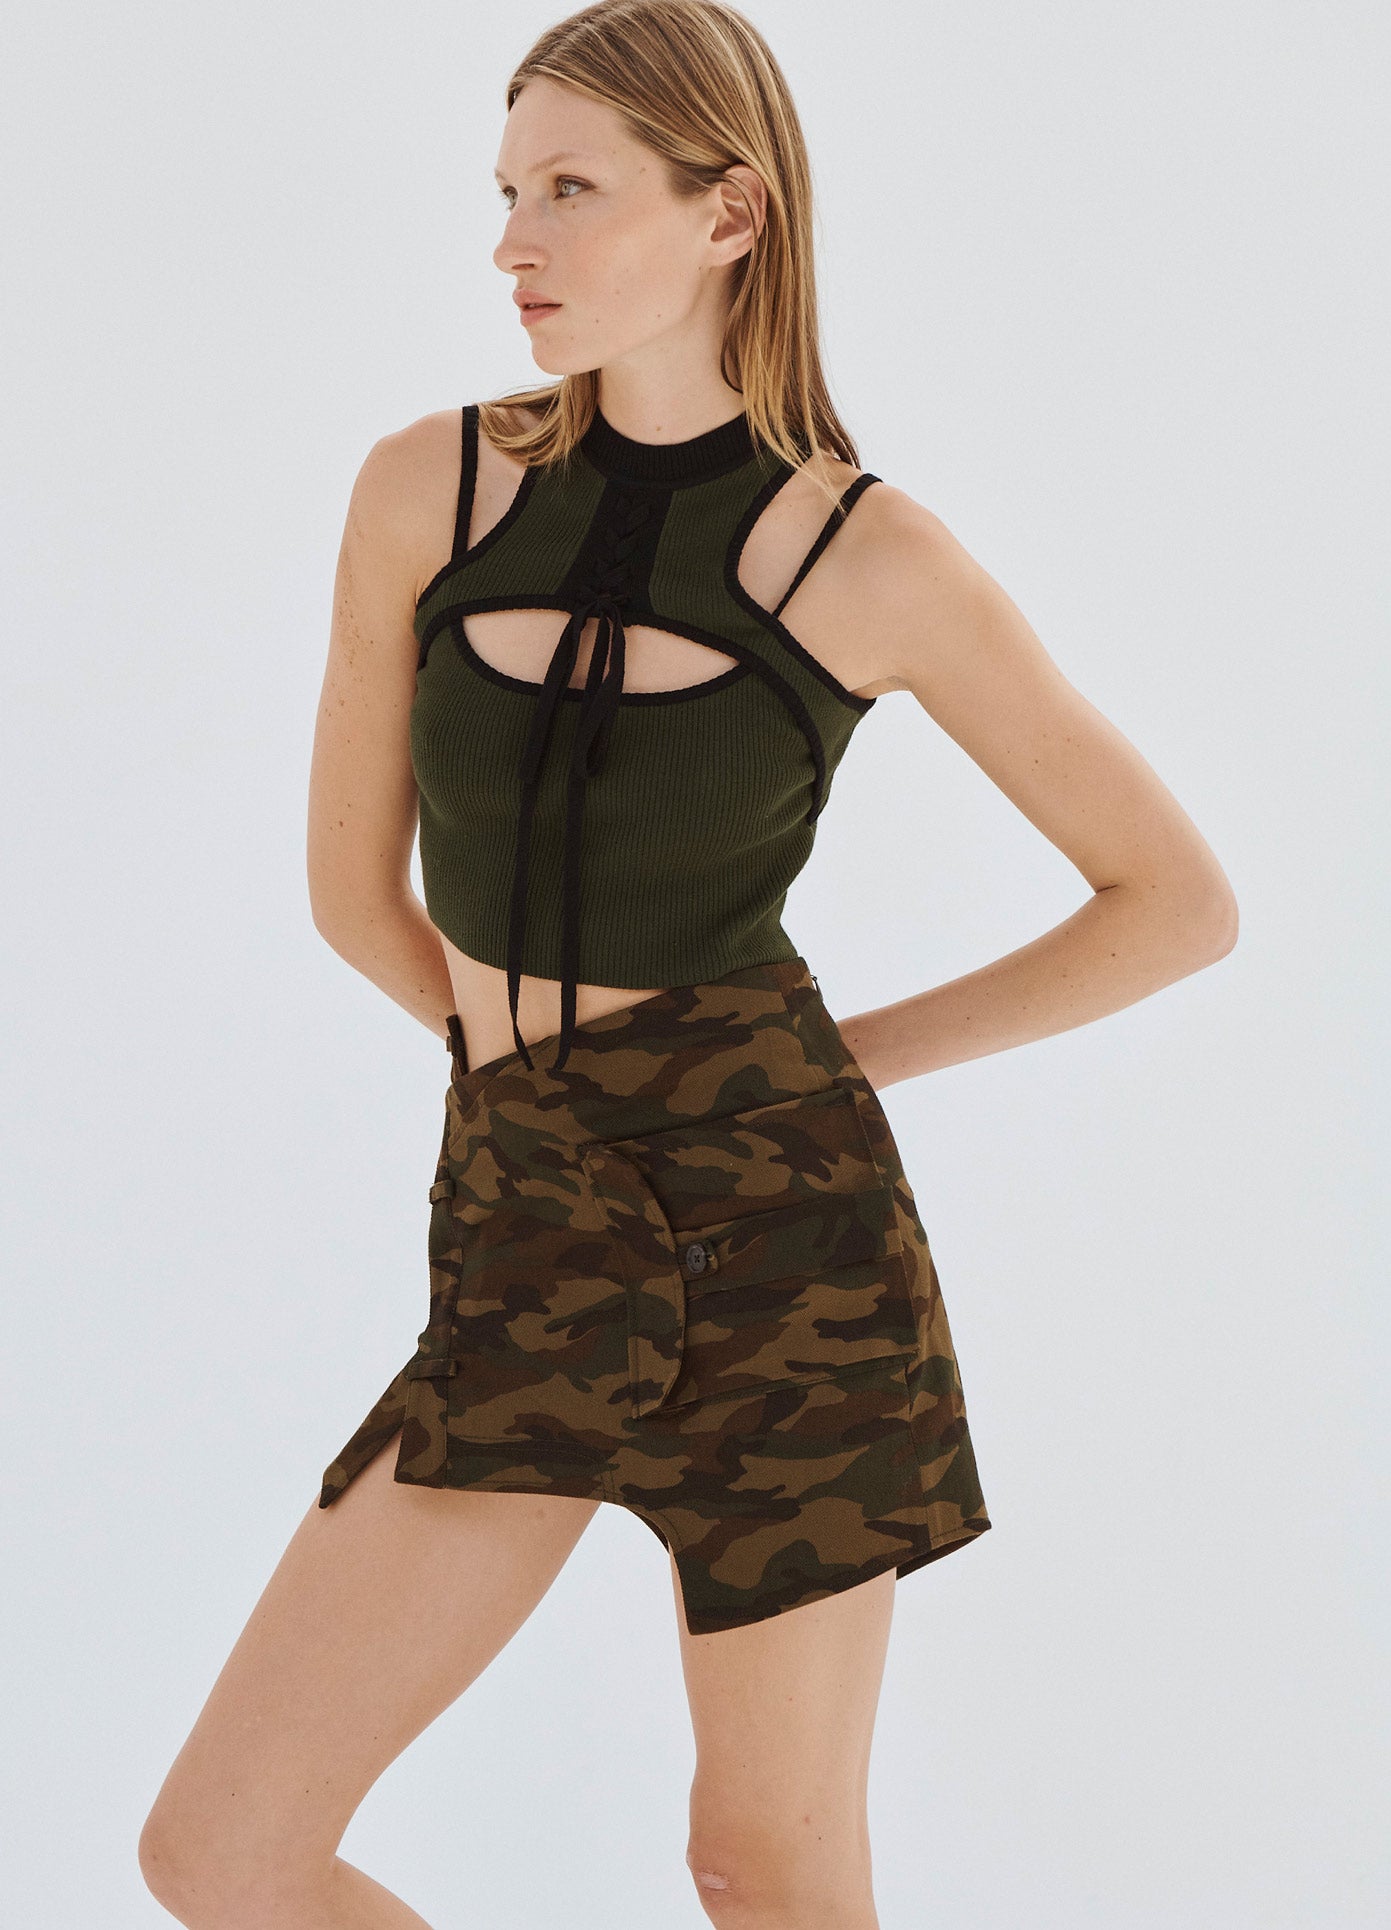 MONSE Deconstructed Trouser Mini Skirt with Pockets in Camo on Model Side Closeup View